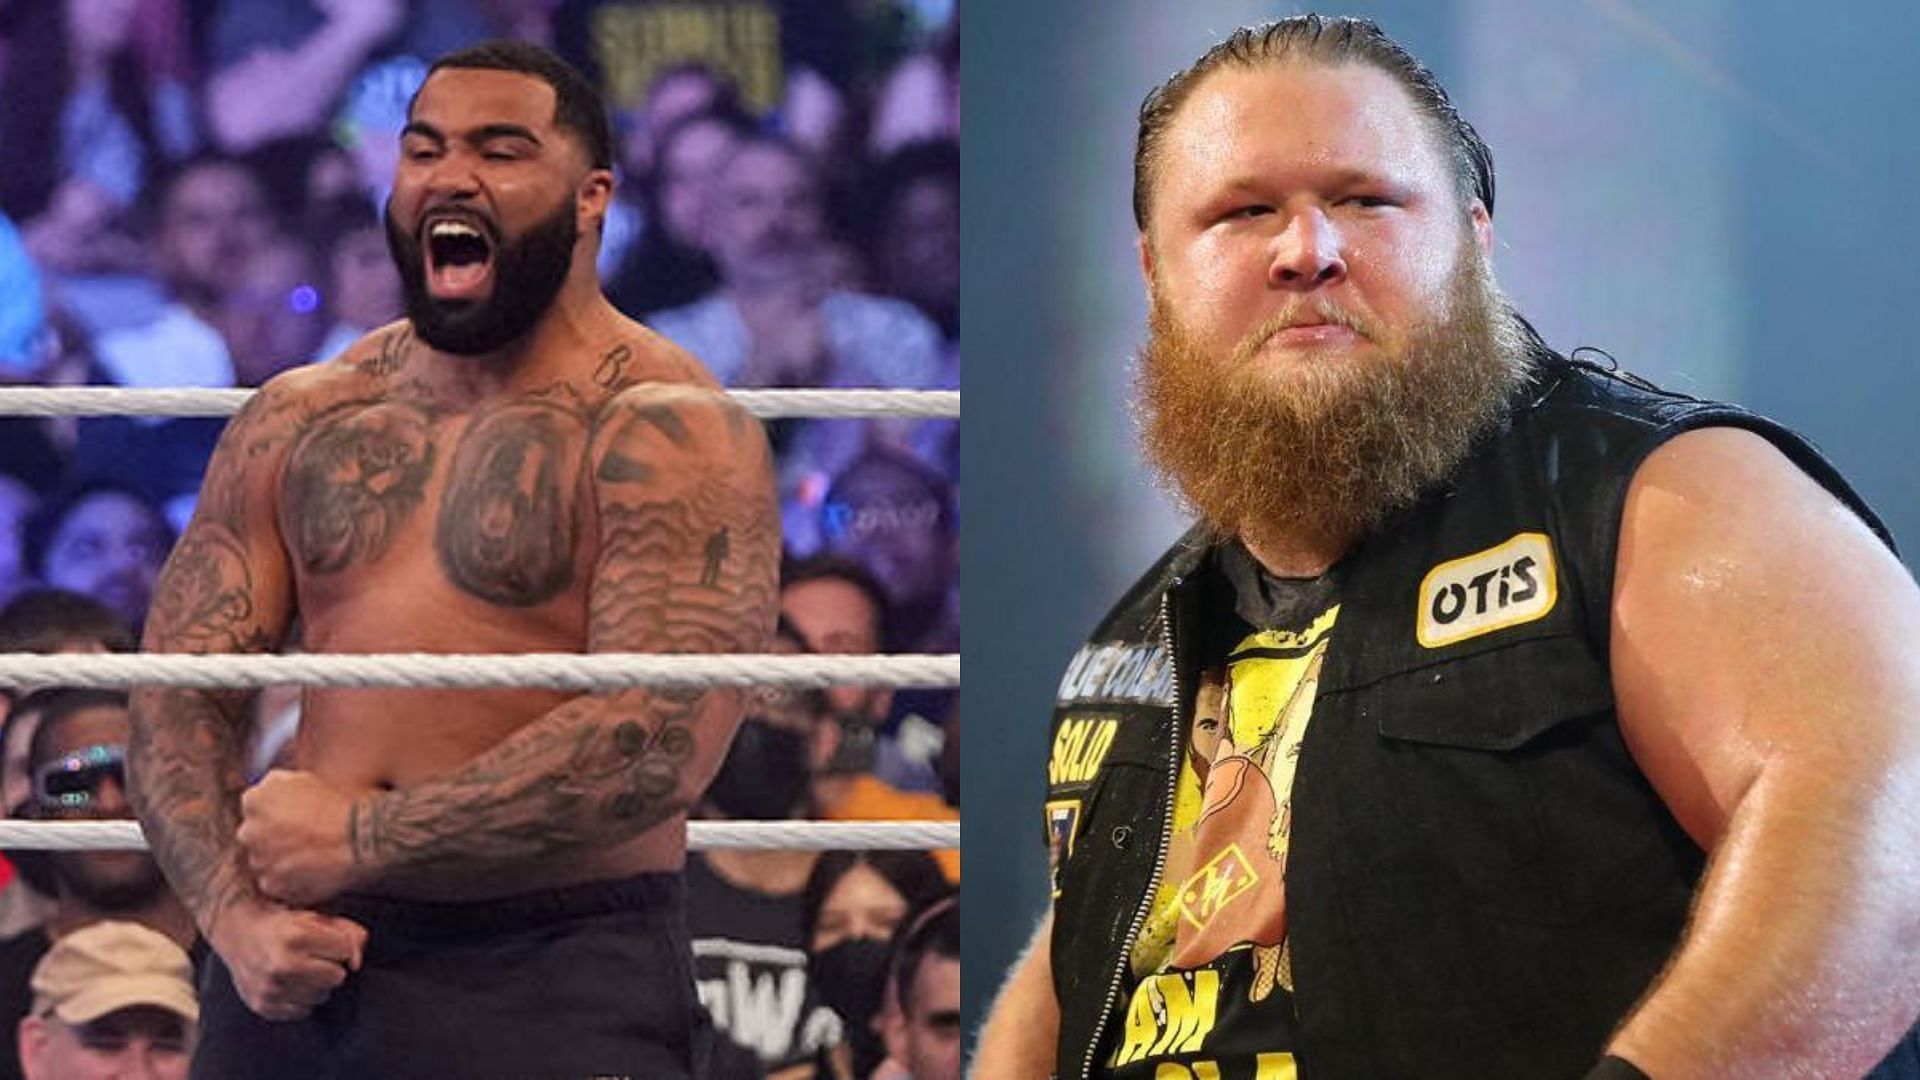 WWE has some potential monsters on their roster